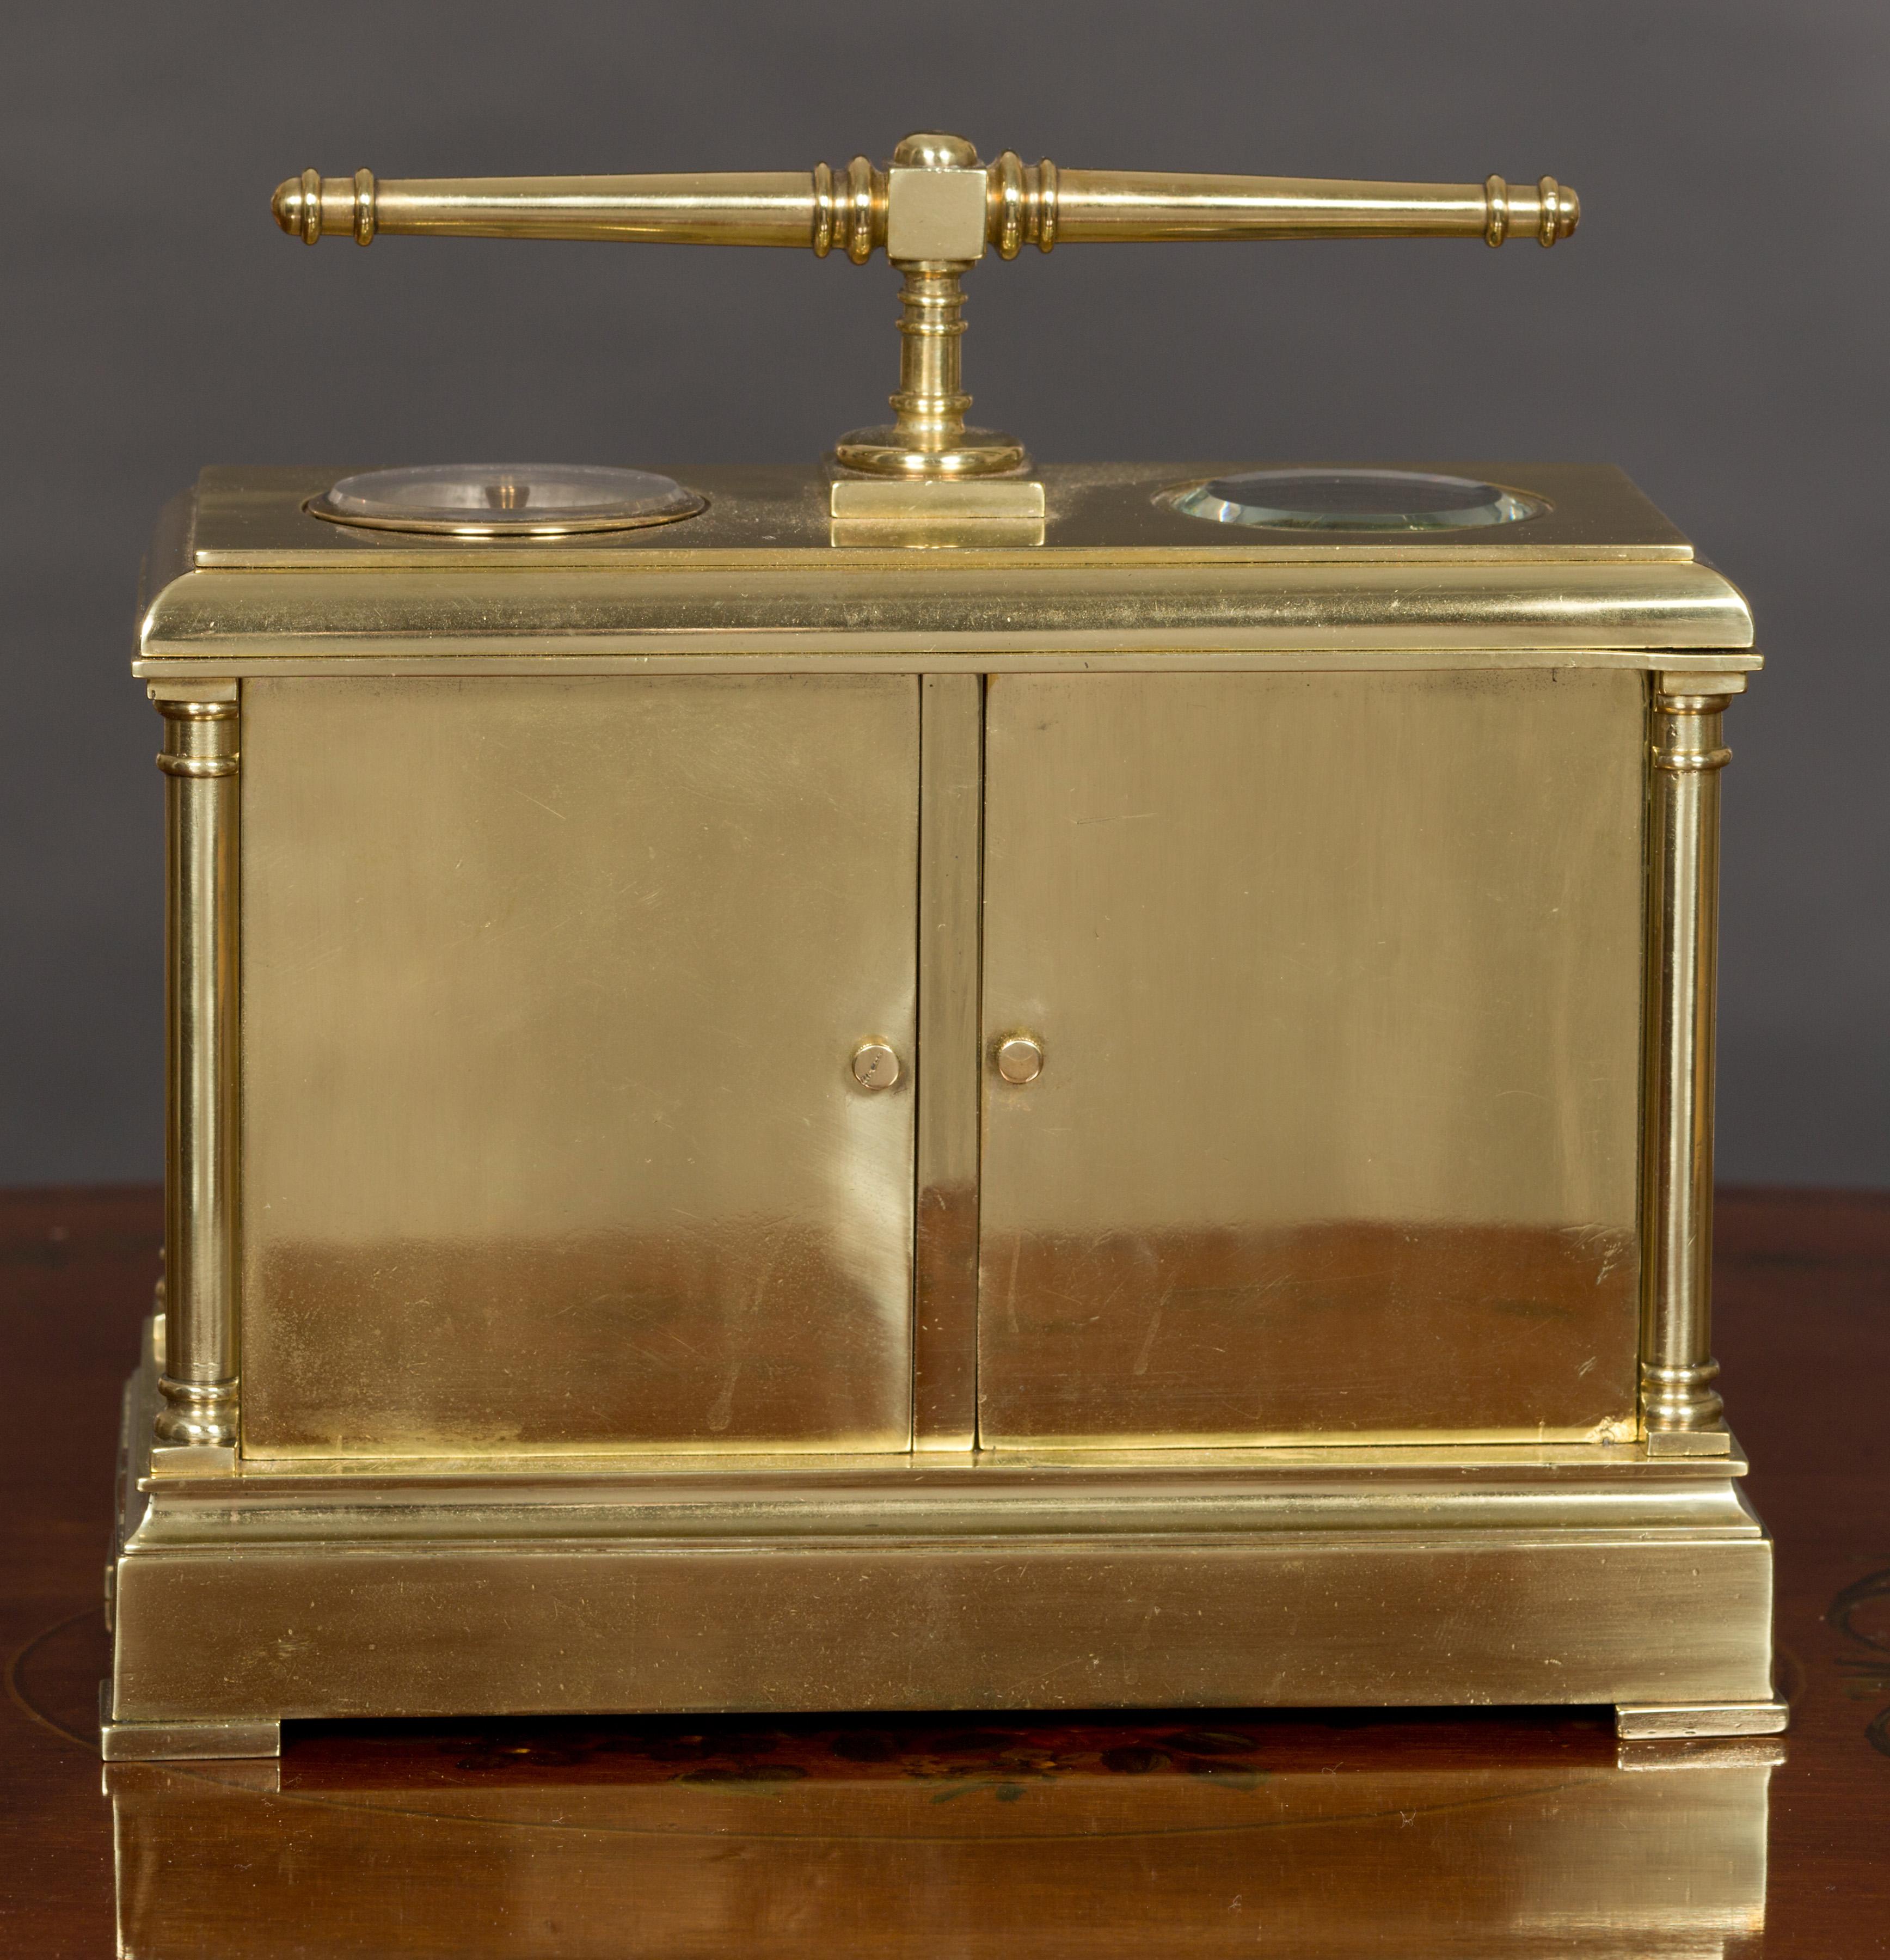 Late Victorian brass clock and barometer set with centrally mounted thermometer with enamel register plate.

The case stands on a raised plinth with pad feet, four brass pillars support the ‘cushion’ top surmounted by a turned and ringed brass